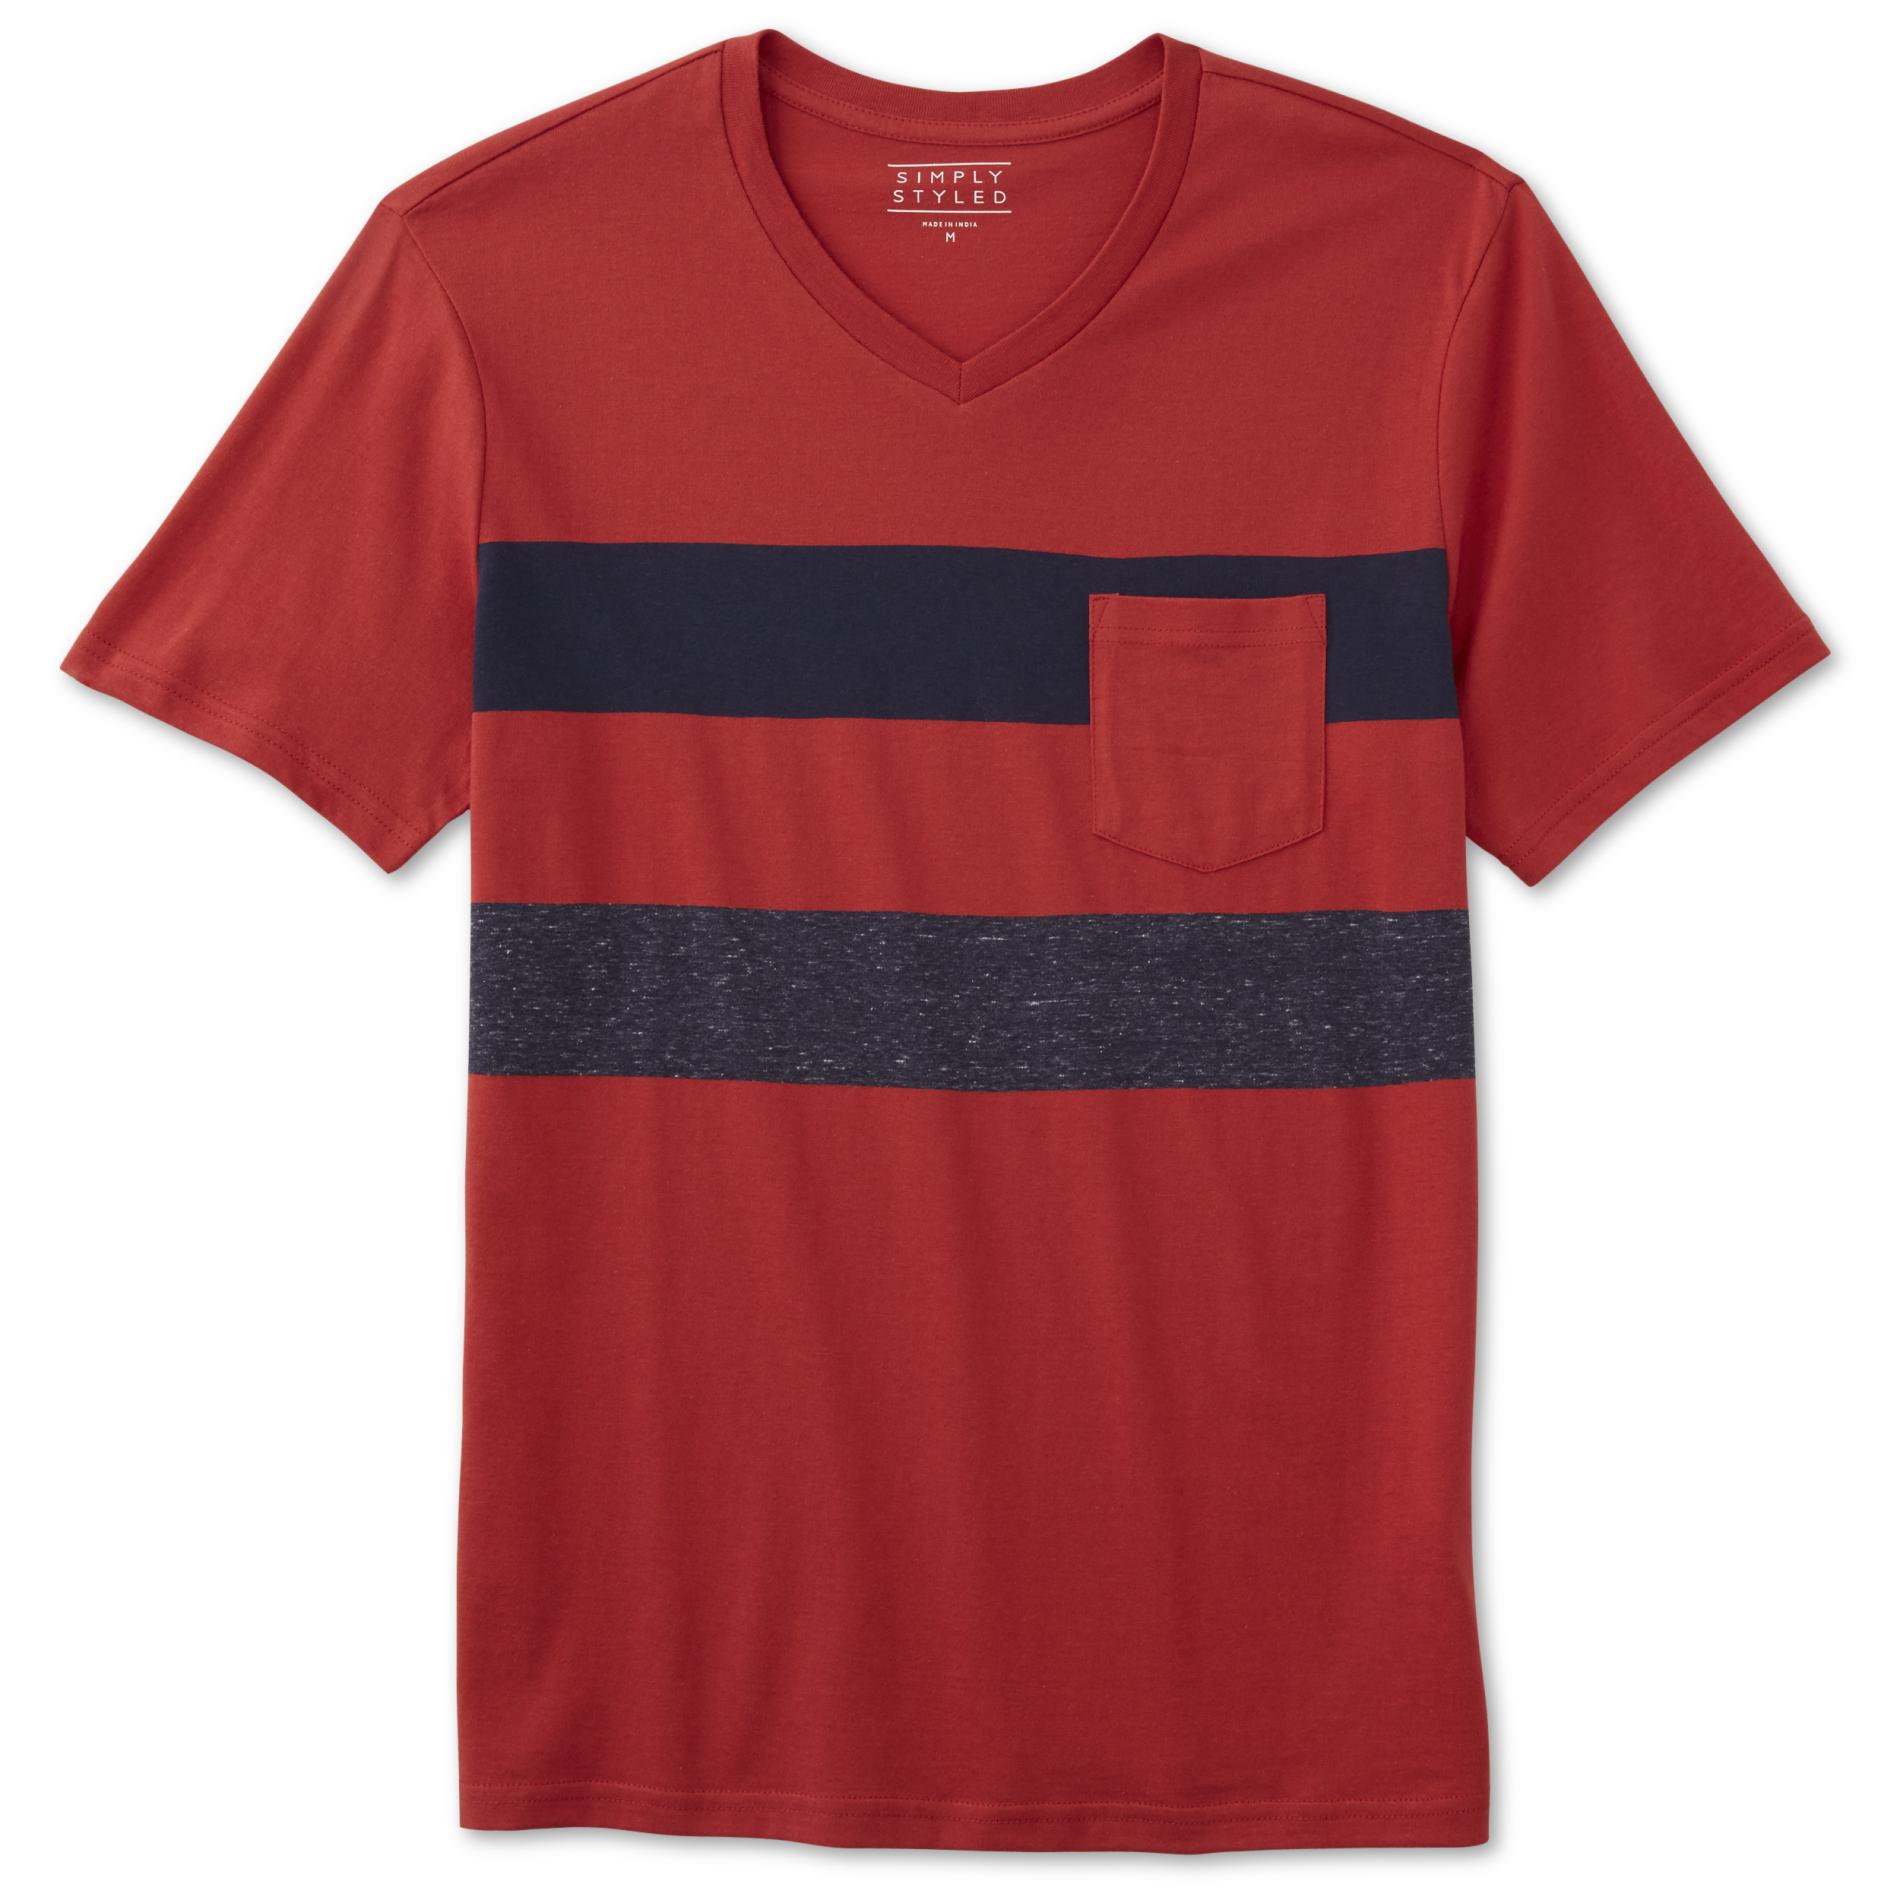 Simply Styled Men's T-Shirt - Striped